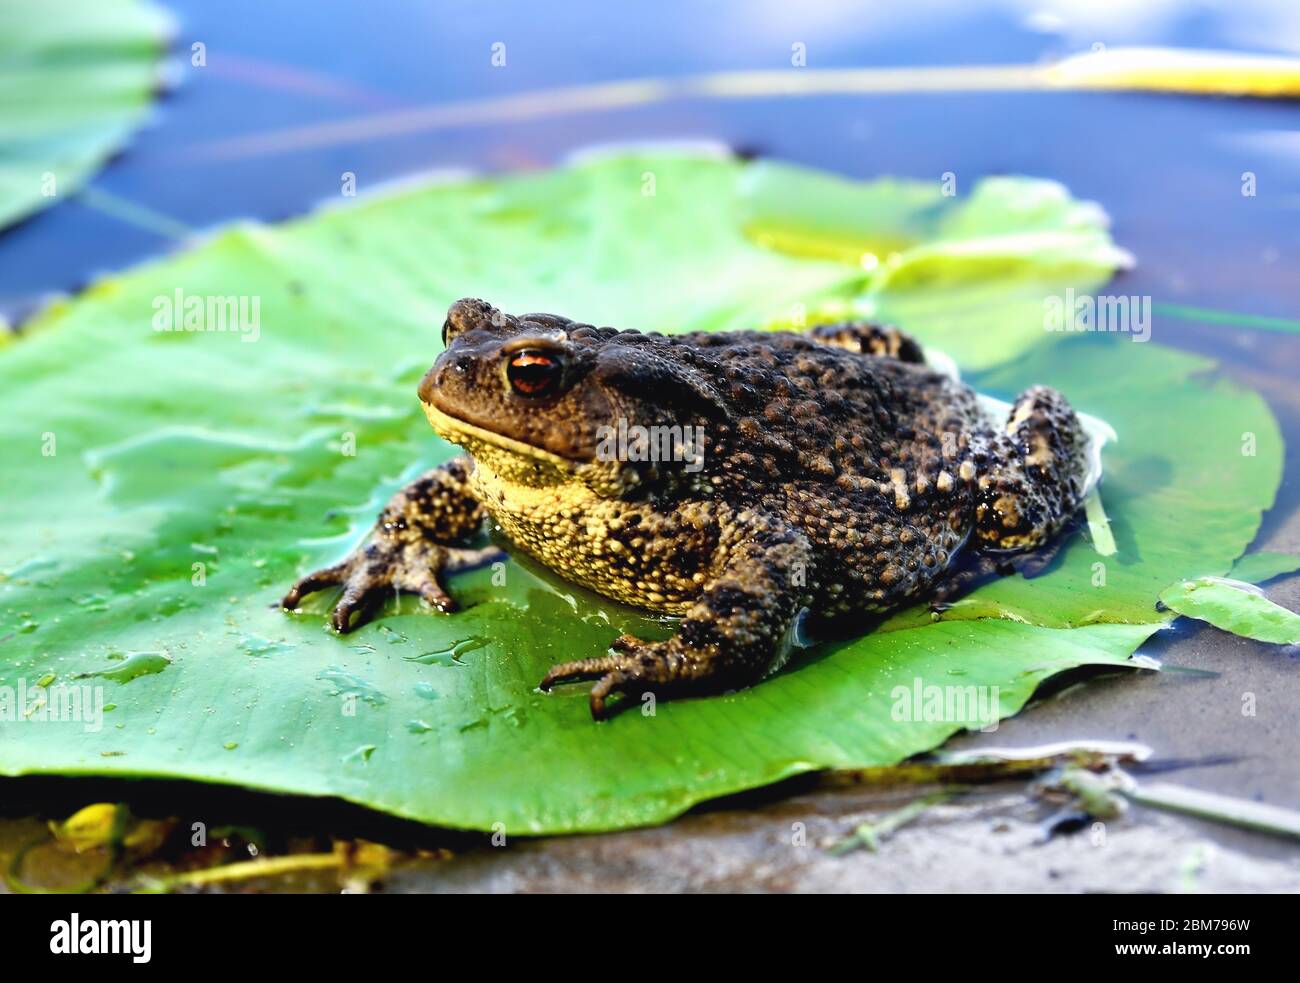 big frog, green leaf of water lily, water, reflection of clouds in water, close-up Stock Photo